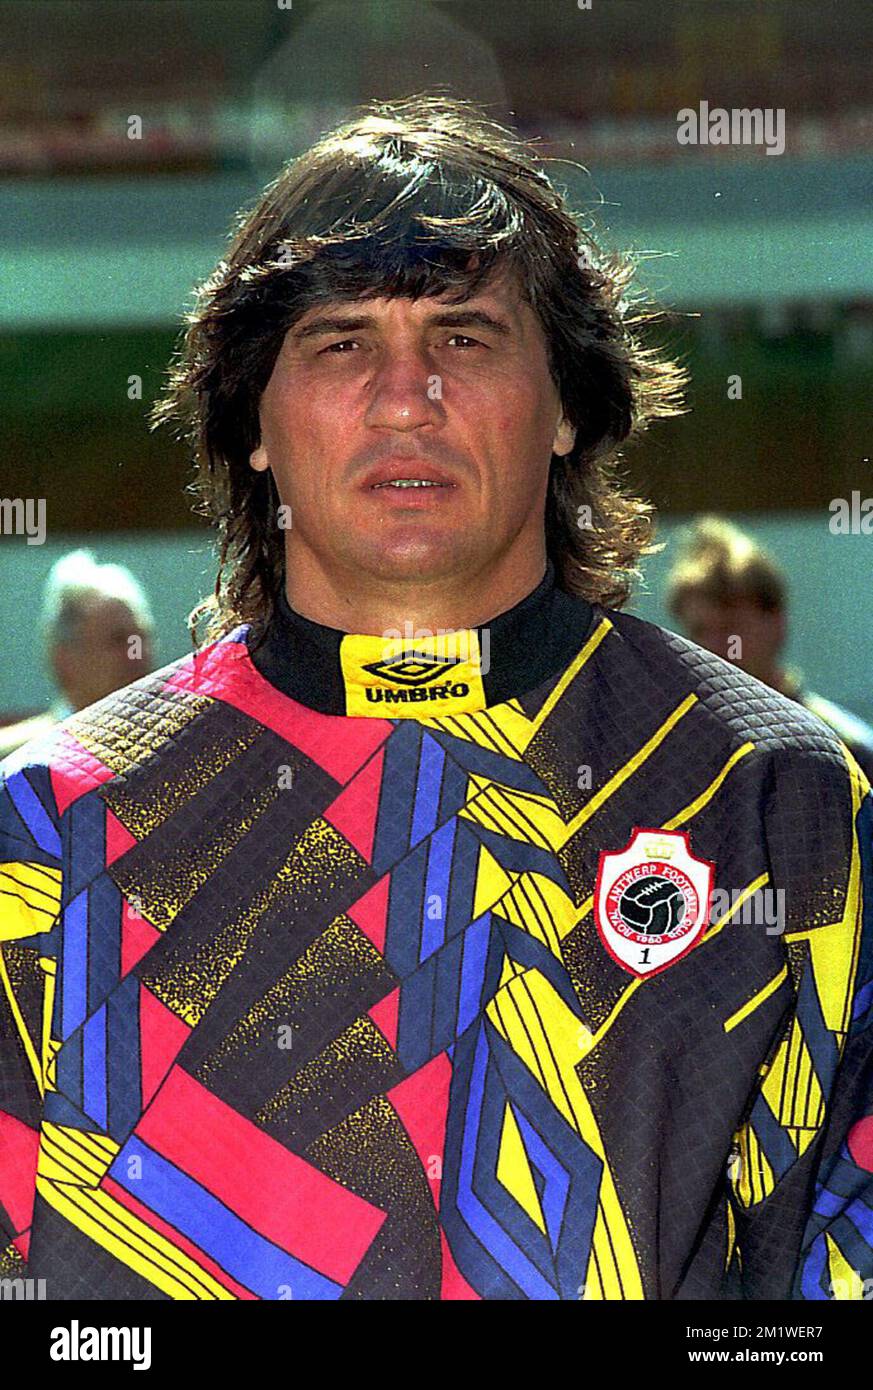 3 Februari 1995 shows the former keeper and former trainer of the soccer team of FC Antwerp, Ratko SVILAR. He's arrested last week in Brugge for an affair of cigarets smuggling that started 23 November 2001and also involves the VLD President of Koksijde, Marc Gunst.  Ratko Silvar was already arrested in Antwerpen in 1991 for harbouring.                  BELGA PHOTO  DANIEL WILLAM Stock Photo